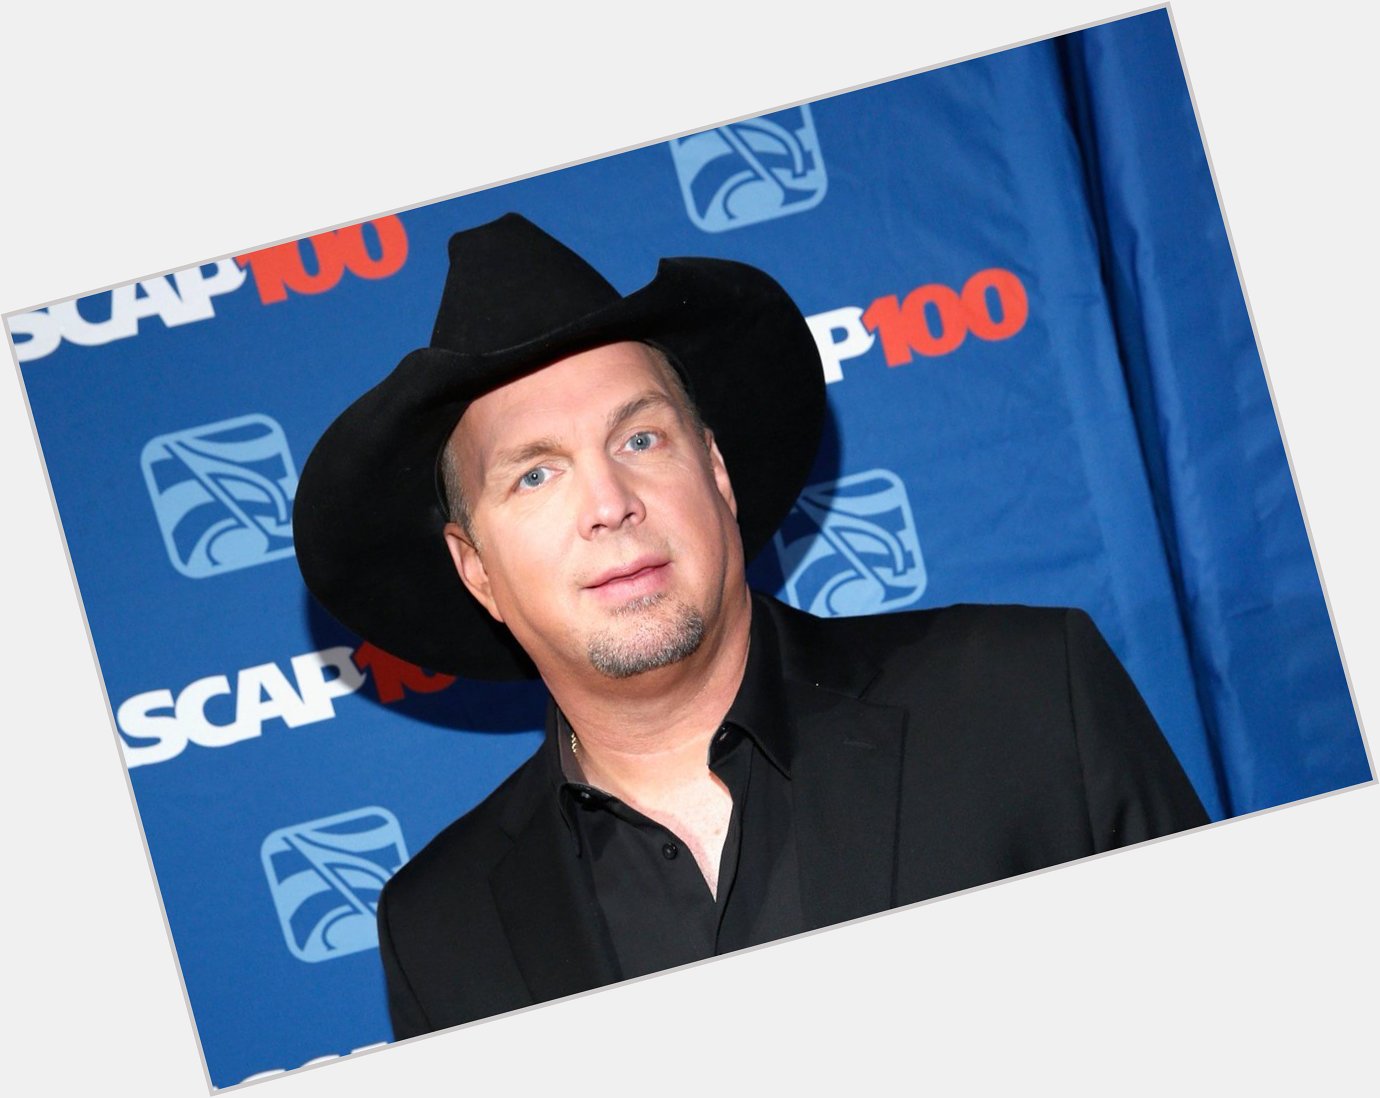 Happy Birthday to Garth Brooks - He is a singer and songwriter.  He is 53 years old today! 